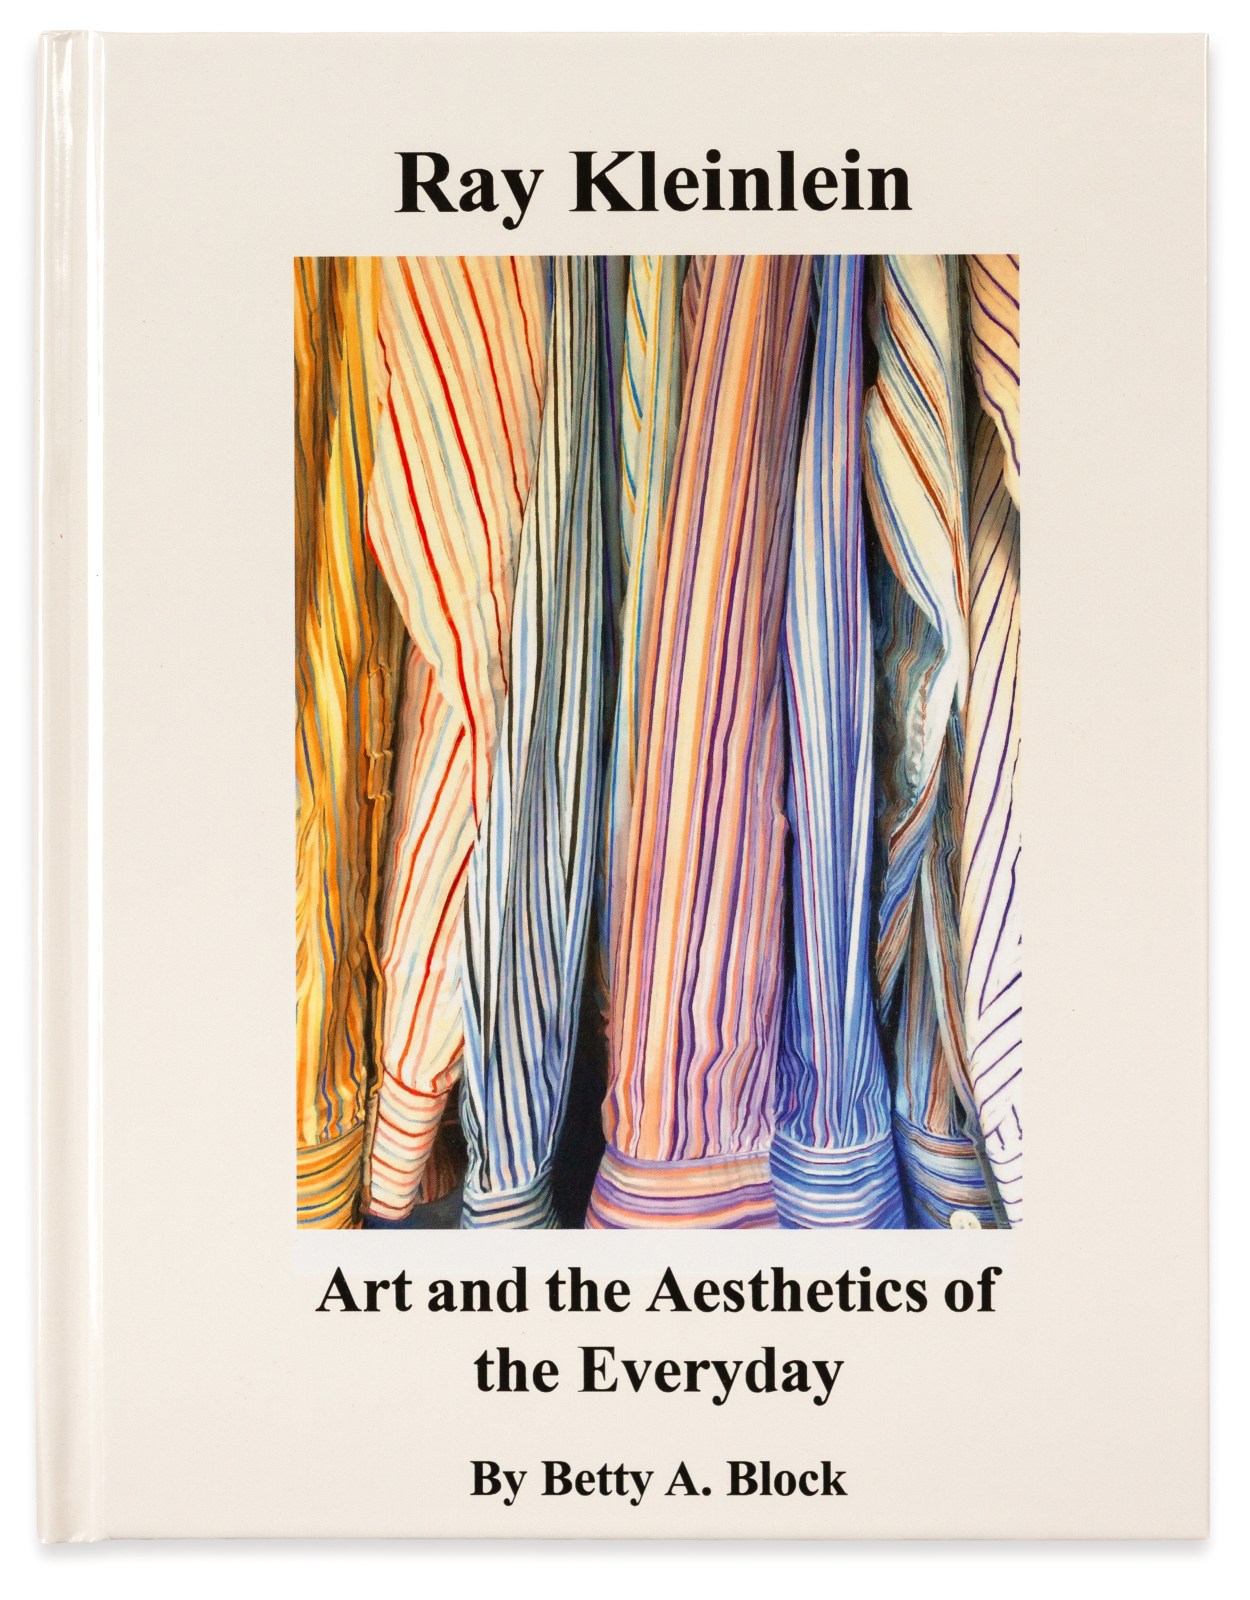 Ray Kleinlein - Art and the Aesthetics of the Everyday - Publications - Paul Thiebaud Gallery